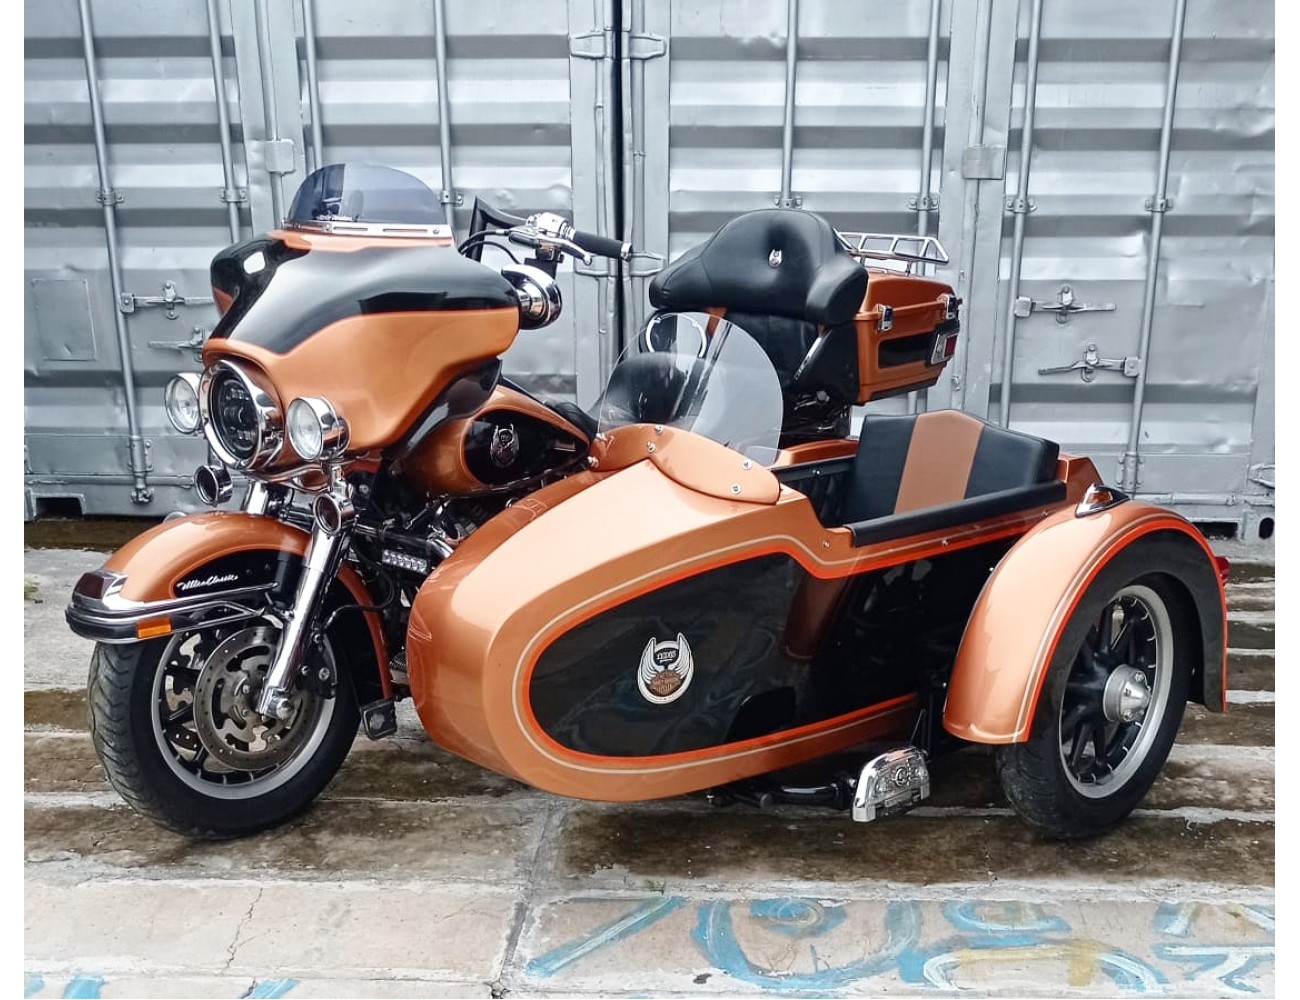 Harley Davidson Softail with side car, Motorcycles